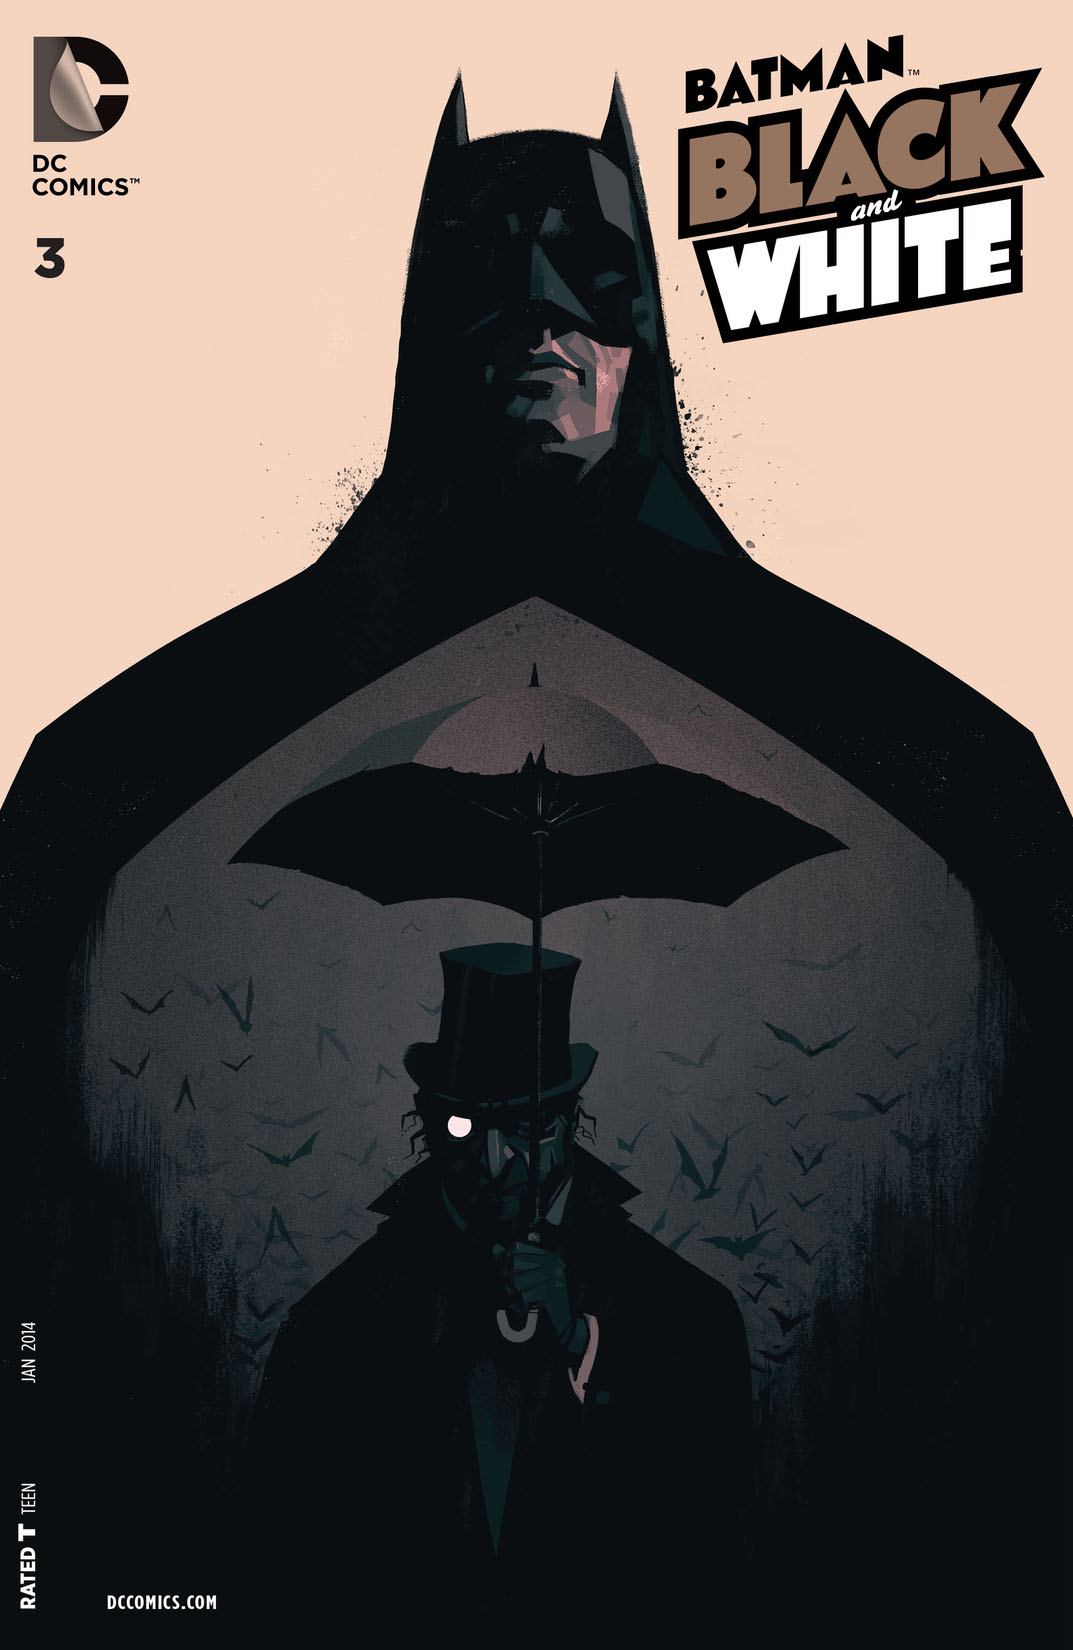 Batman Black and White (2013-) #3 preview images